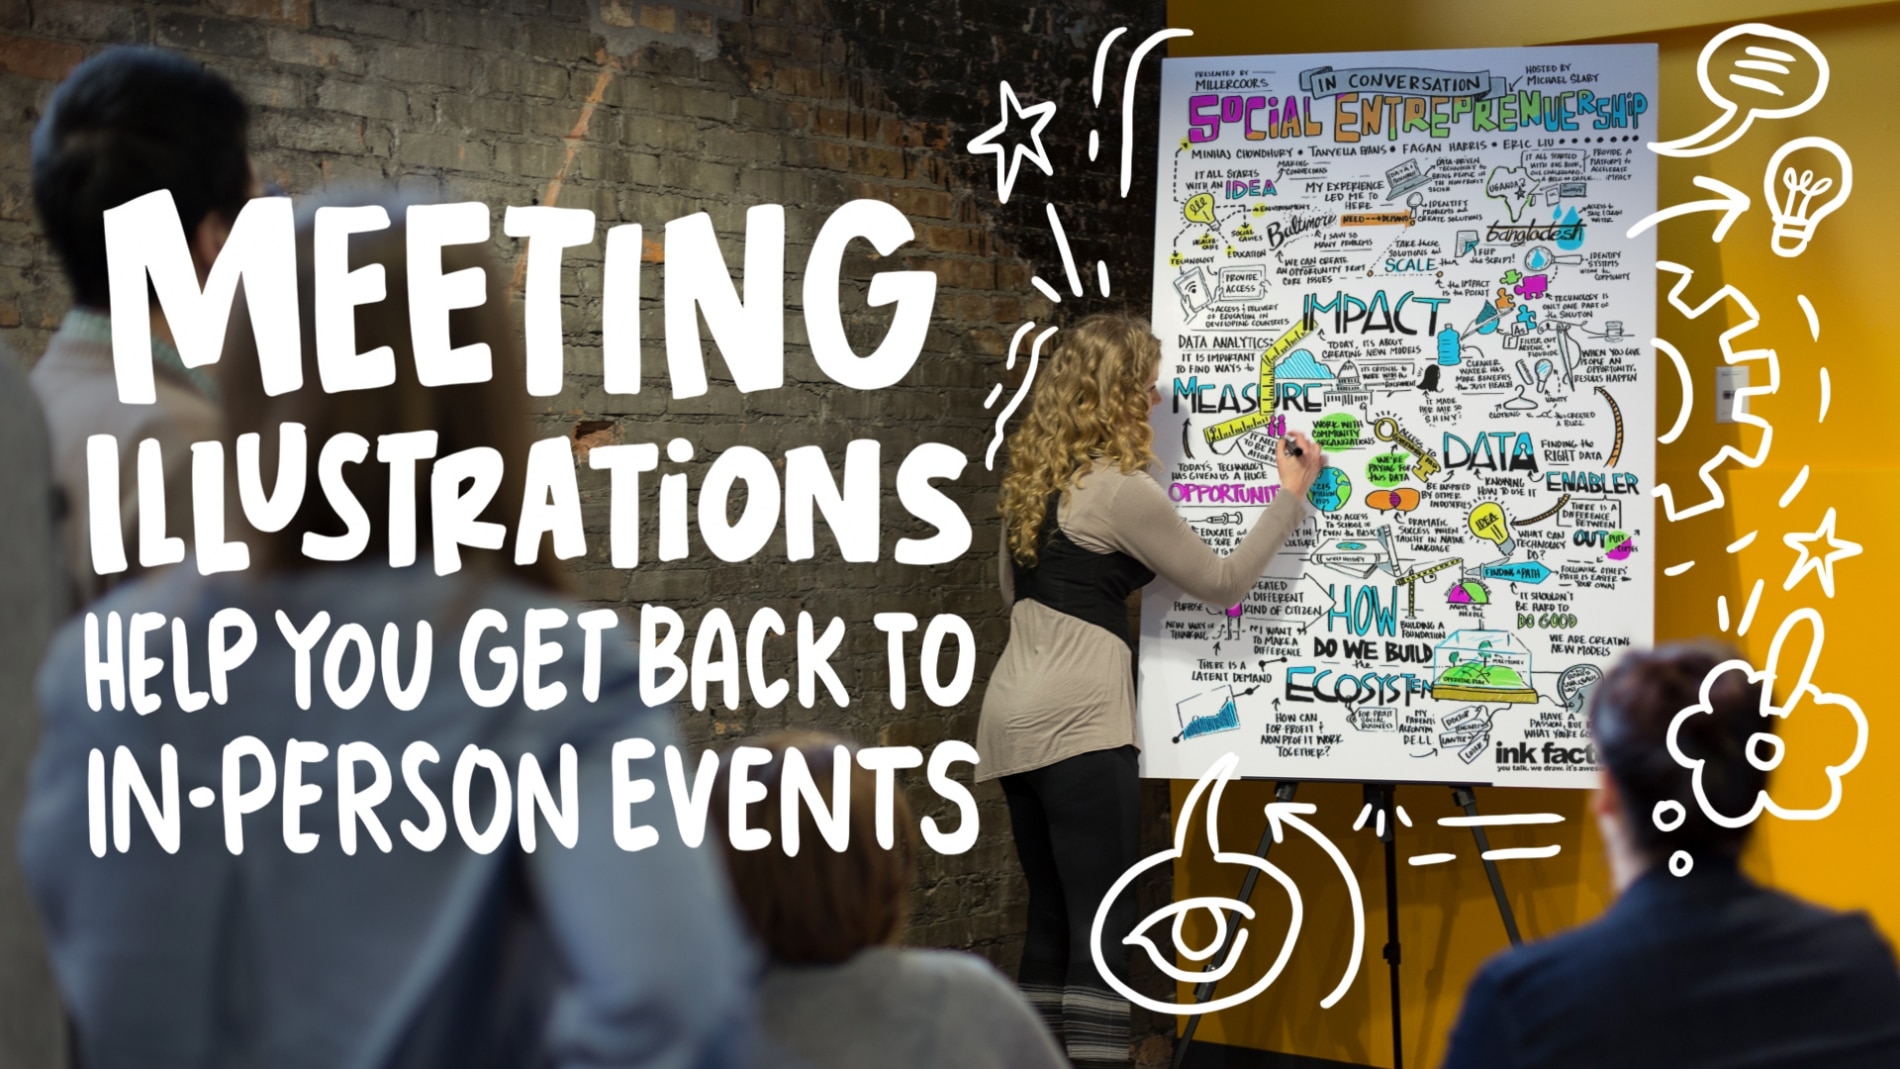 Meeting iIlustrations help you get back to in-person events